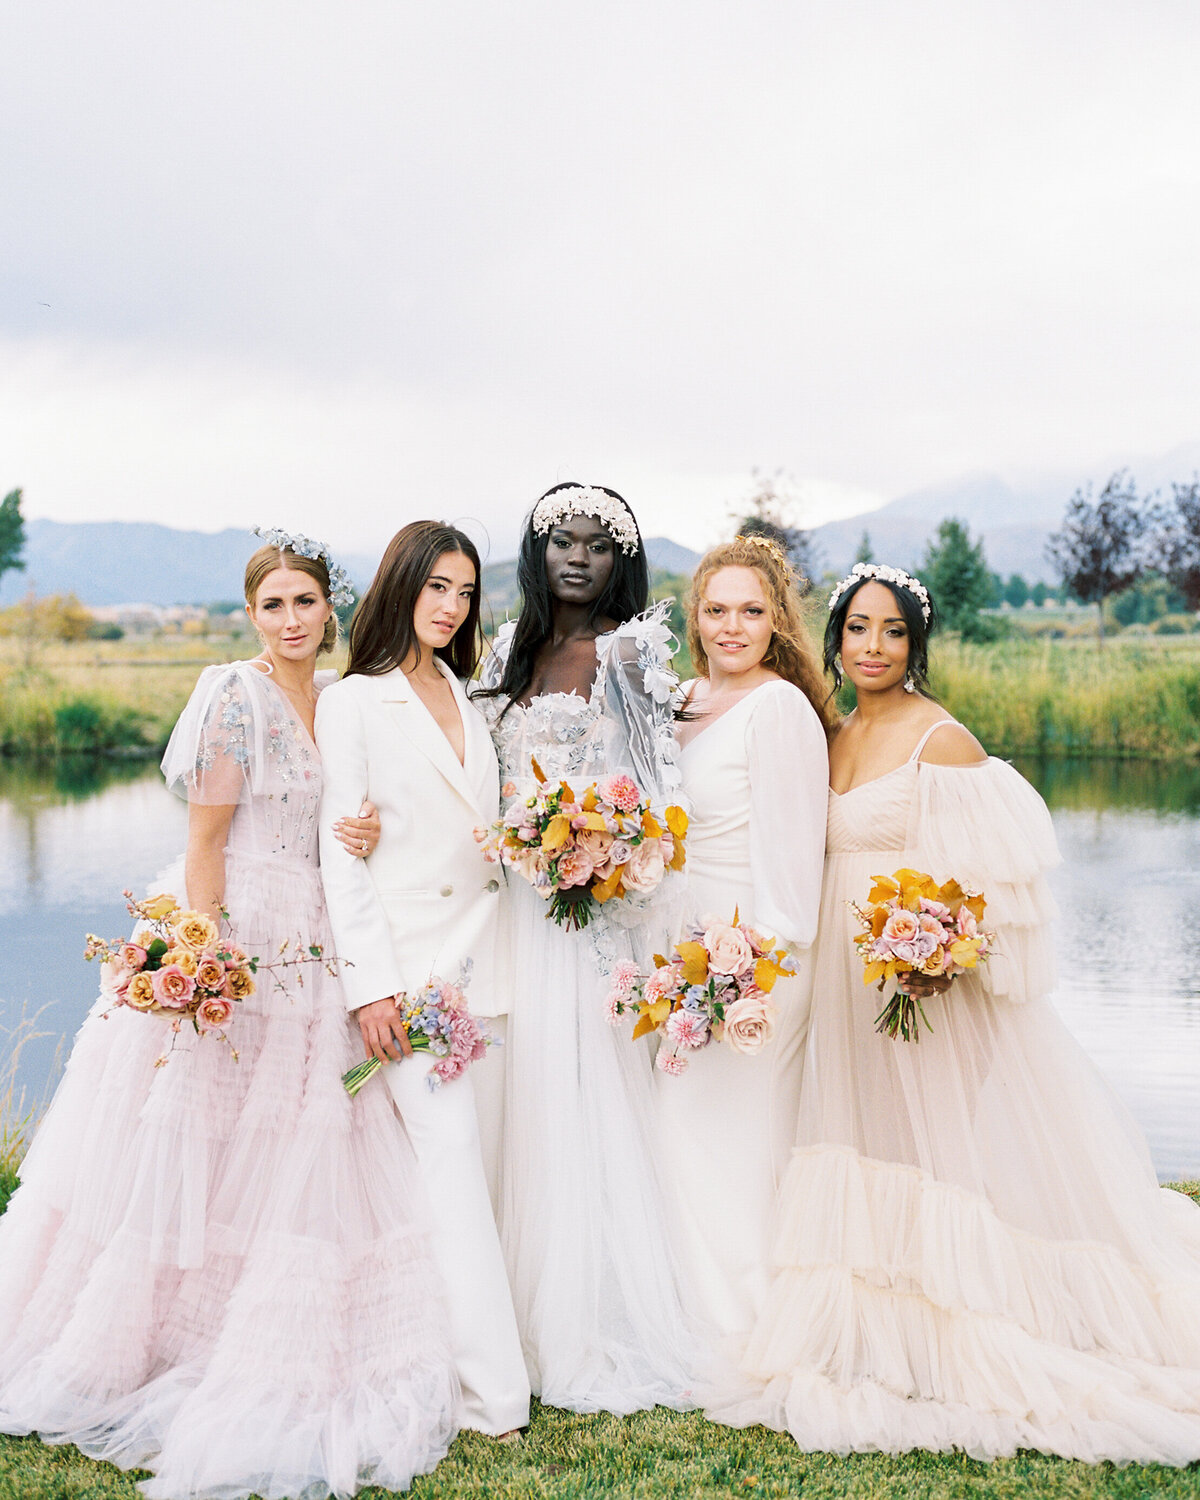 Diverse women in romantic gowns